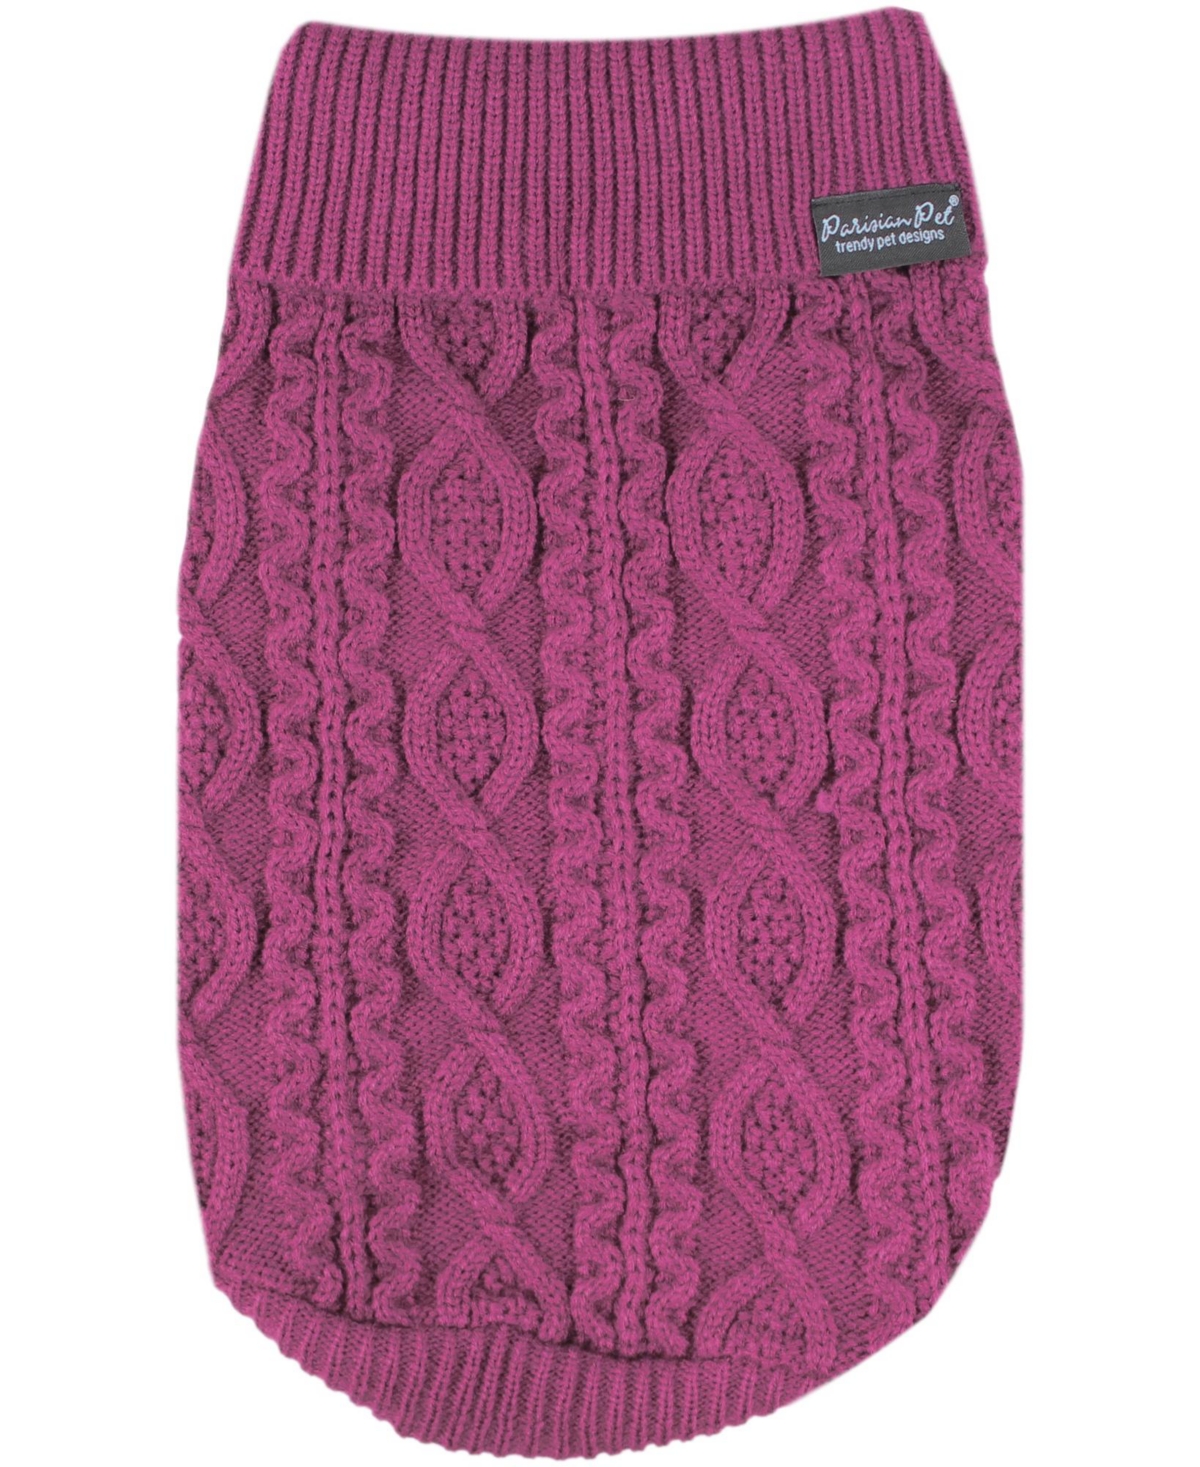 Cable Knit Raspberry Dog Sweater - Cranberry